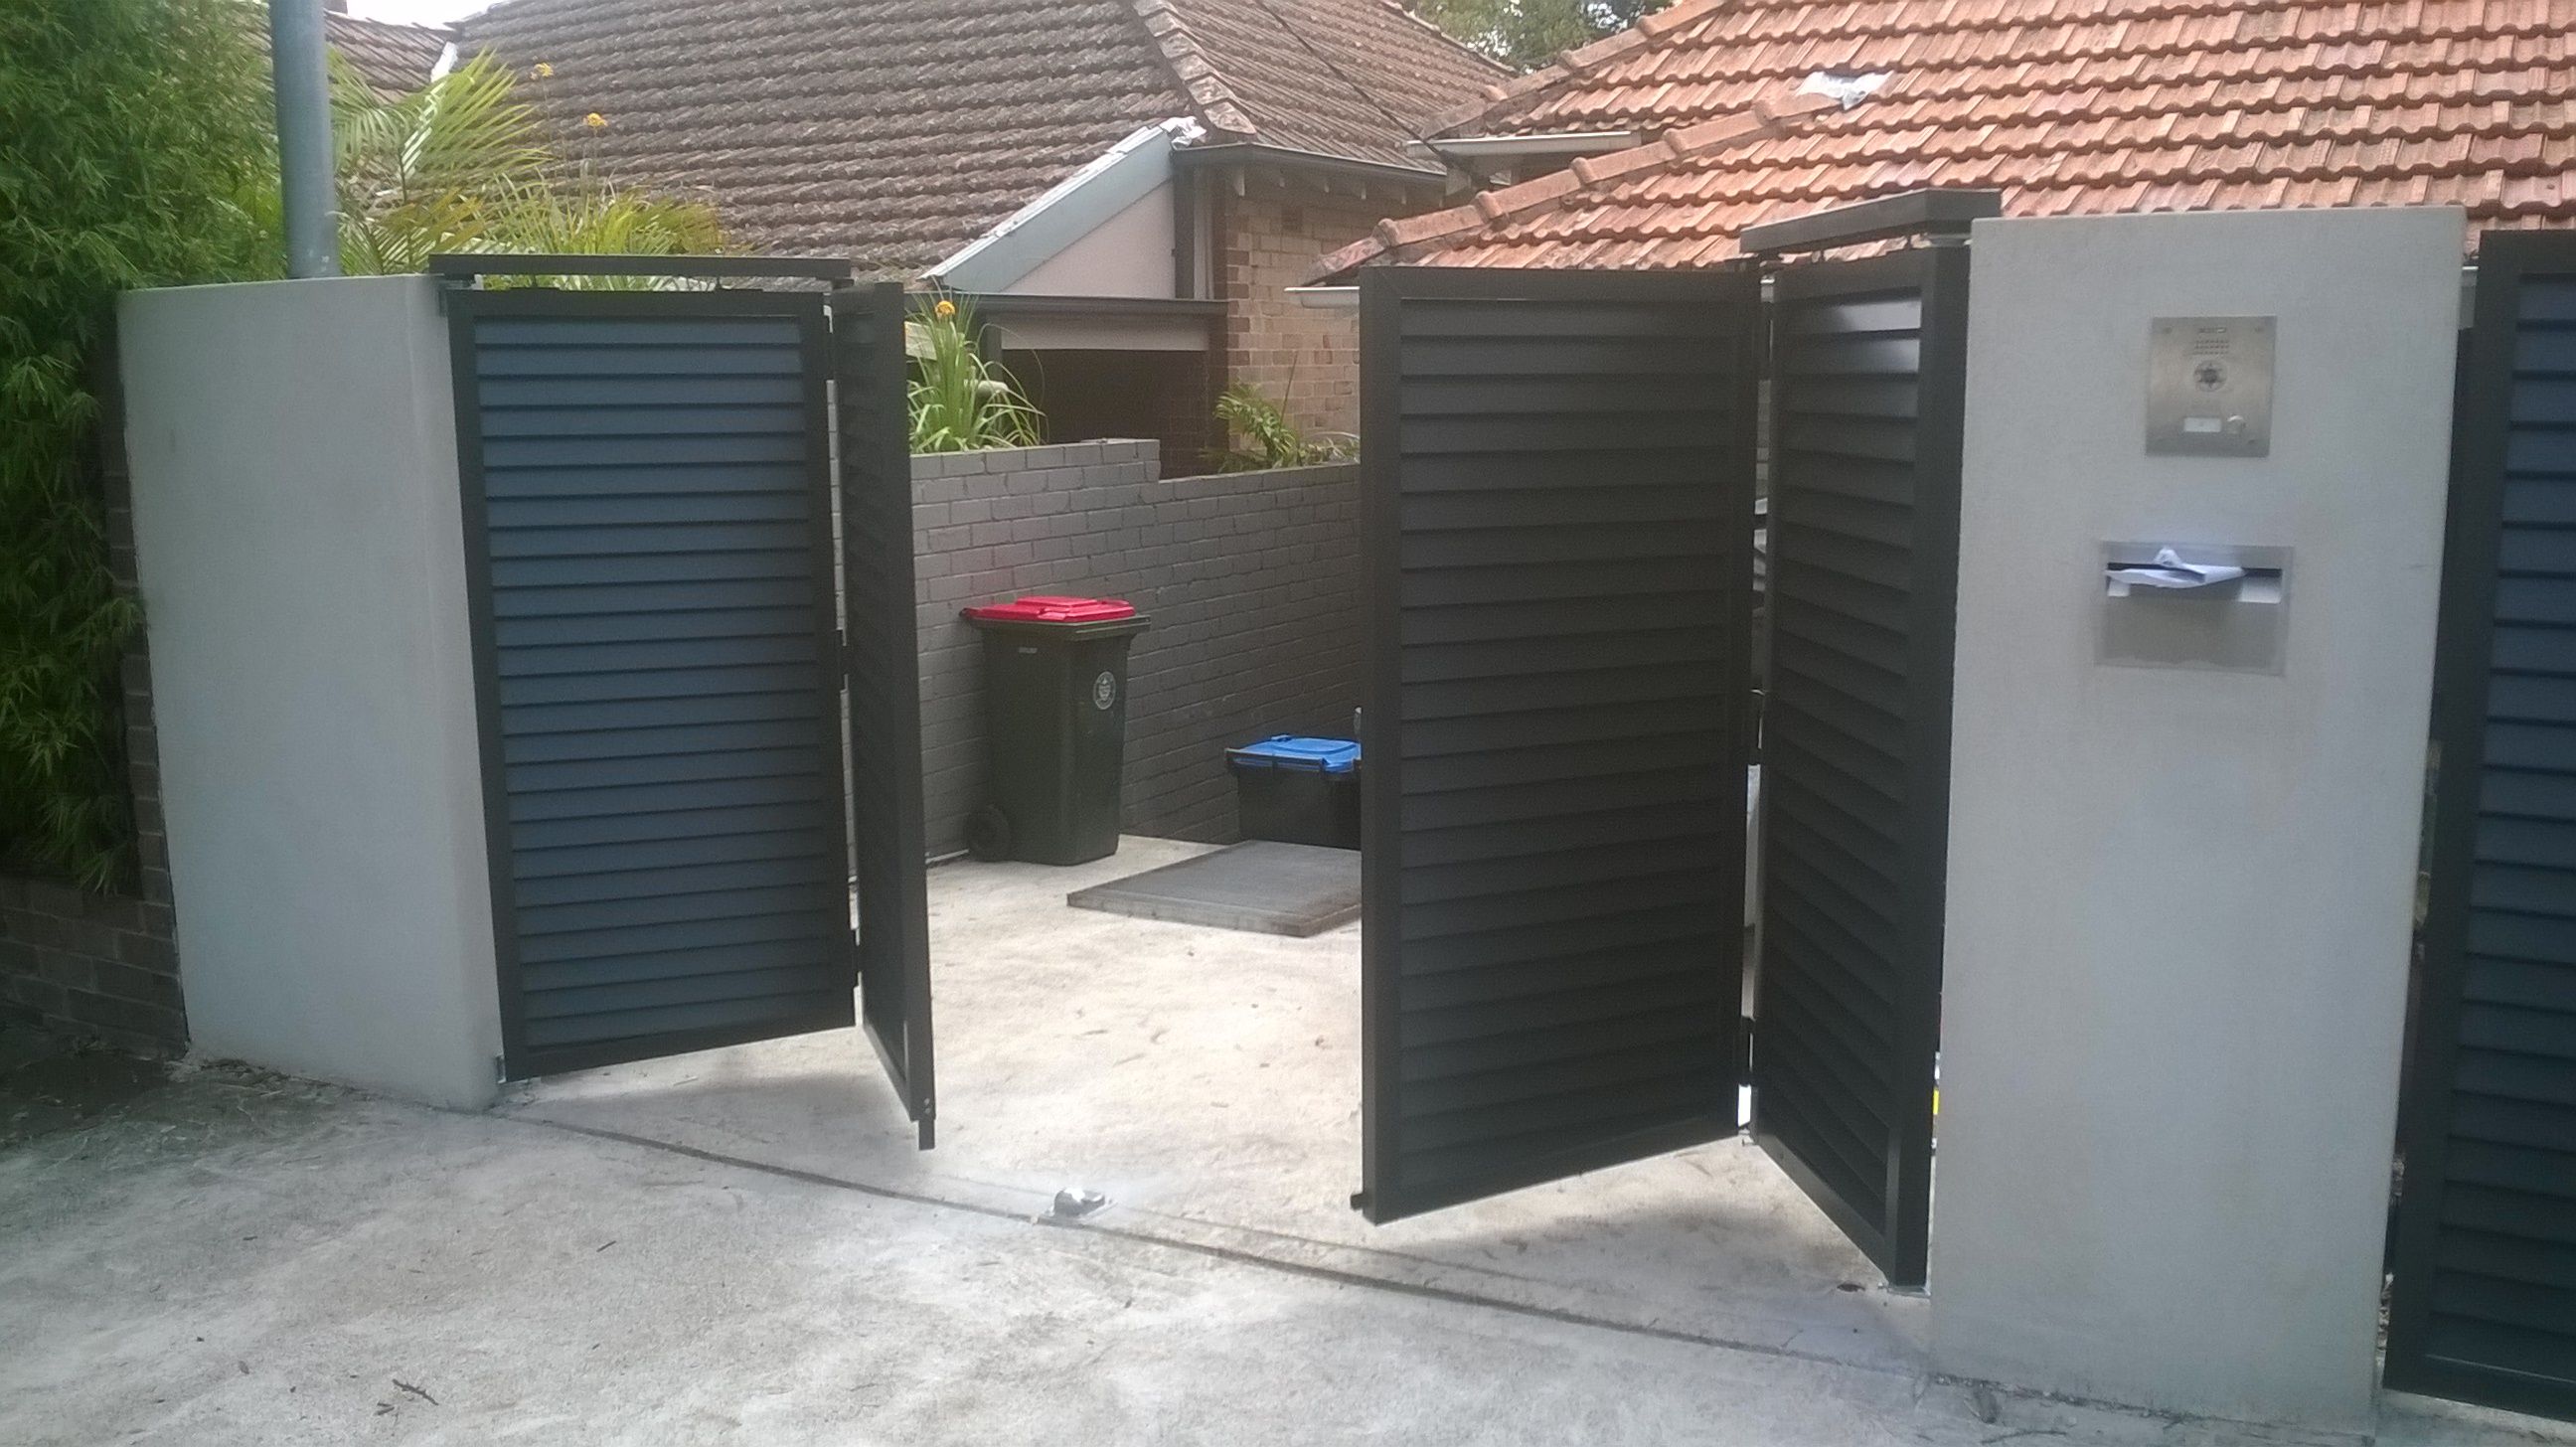 New bi-folding automatic gates. Allows you to have automatic swing ...